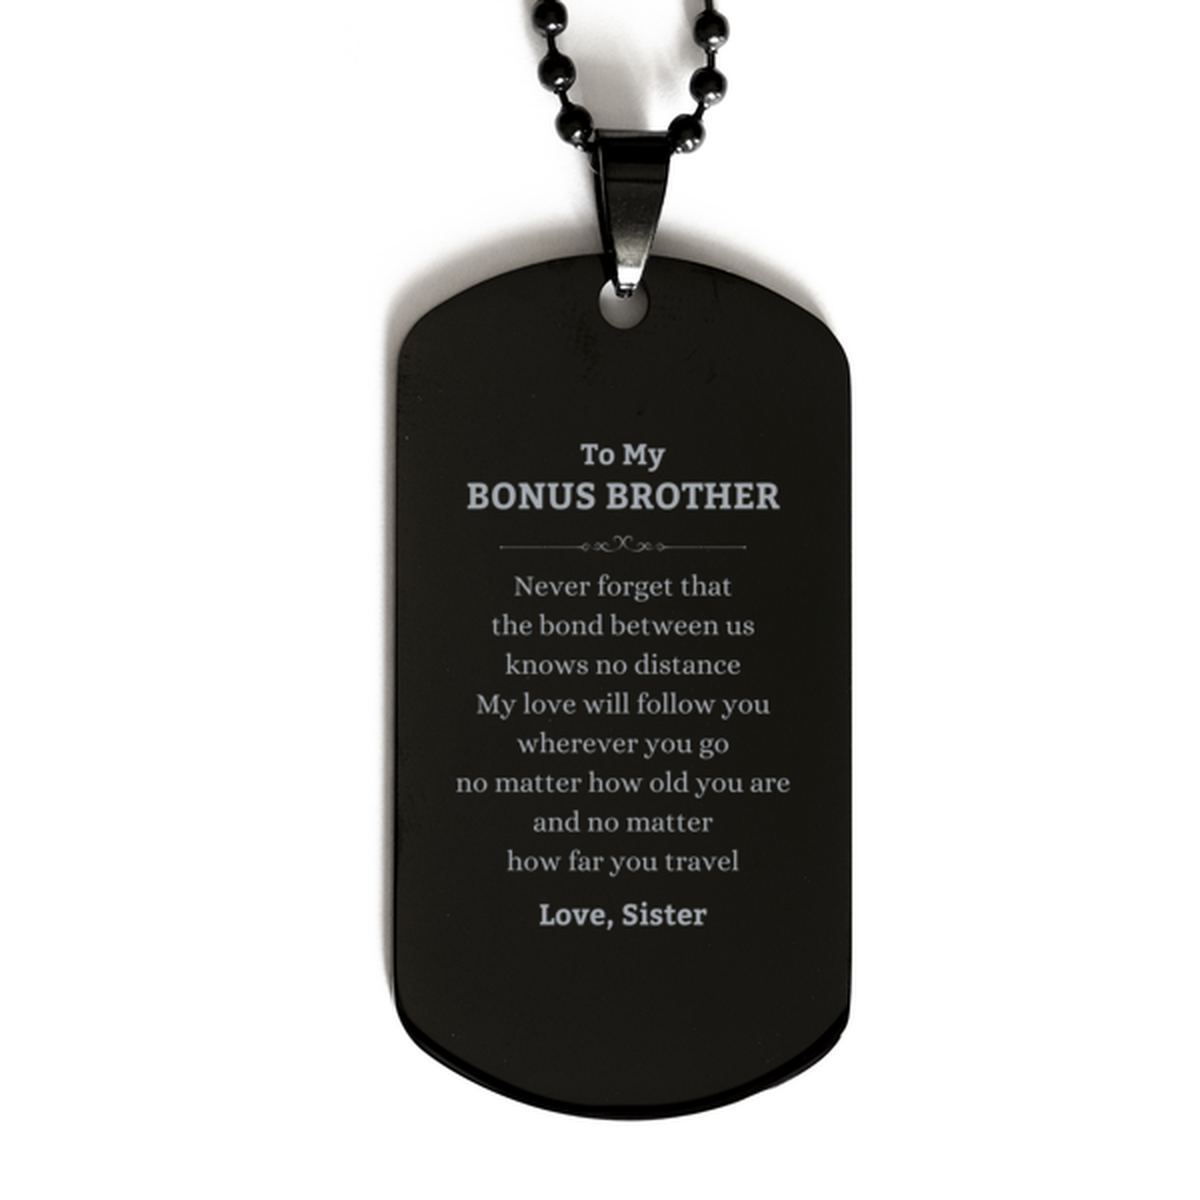 Bonus Brother Birthday Gifts from Sister, Adjustable Black Dog Tag for Bonus Brother Christmas Graduation Unique Gifts Bonus Brother Never forget that the bond between us knows no distance. Love, Sister